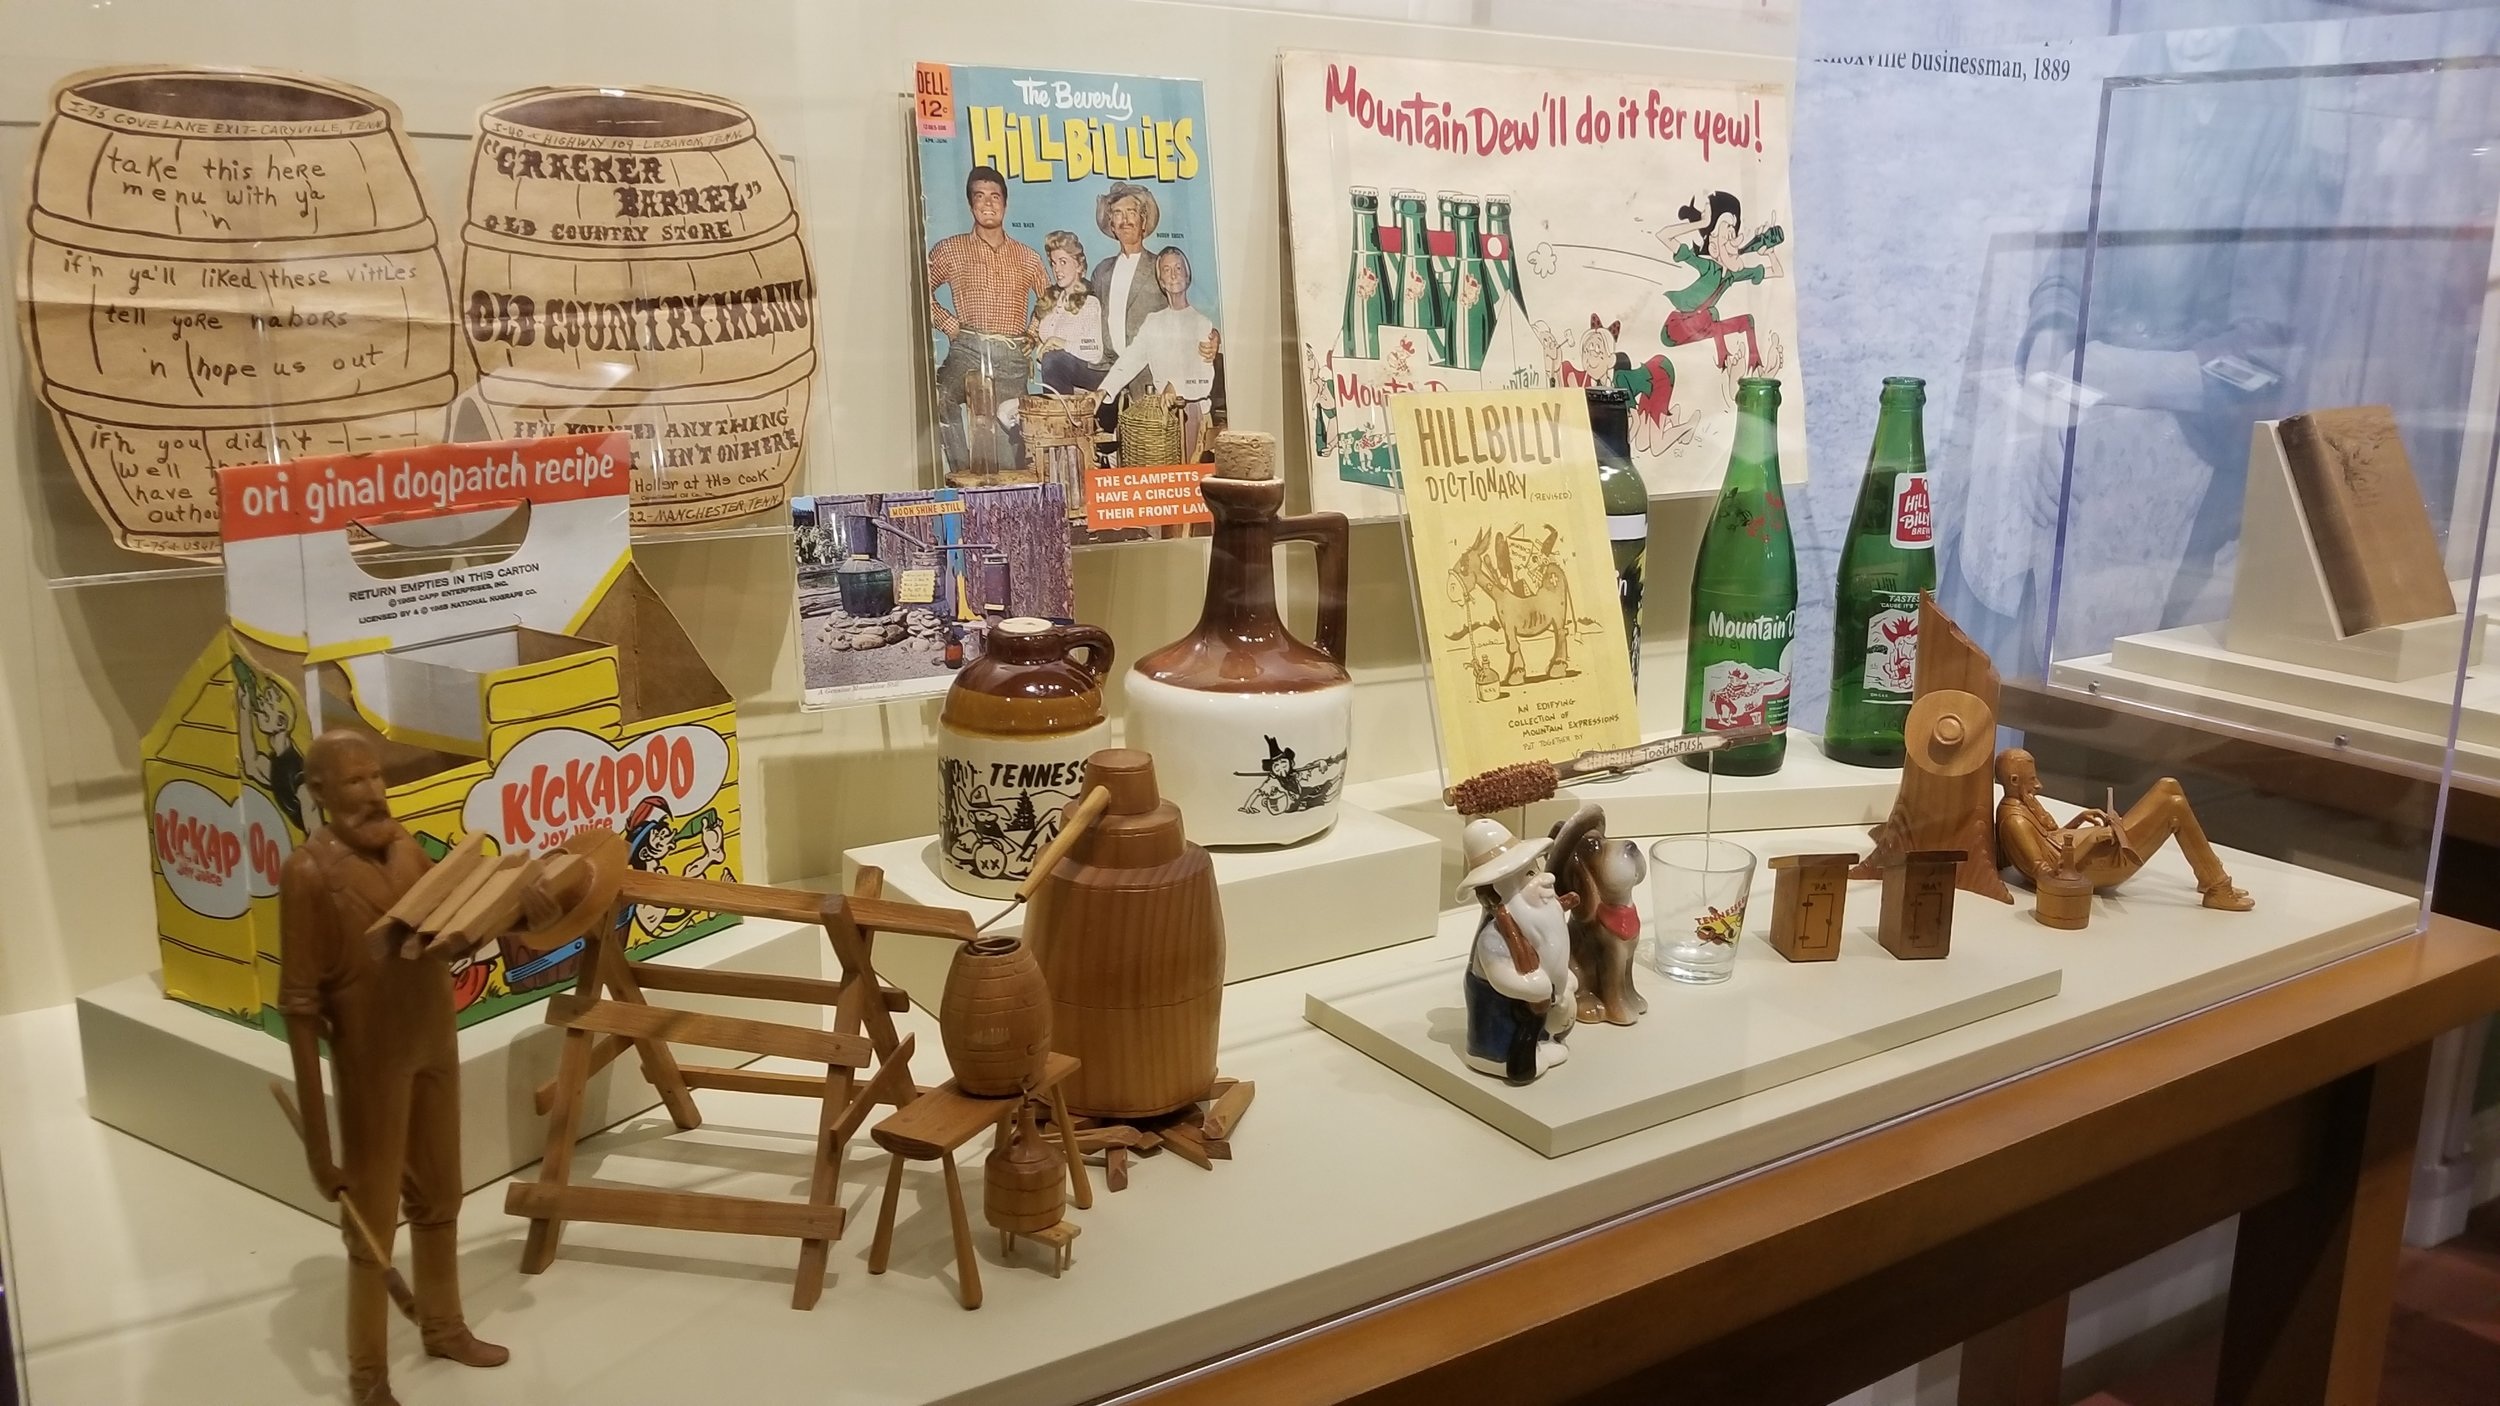 Hillbilly Exhibit at the ETHC